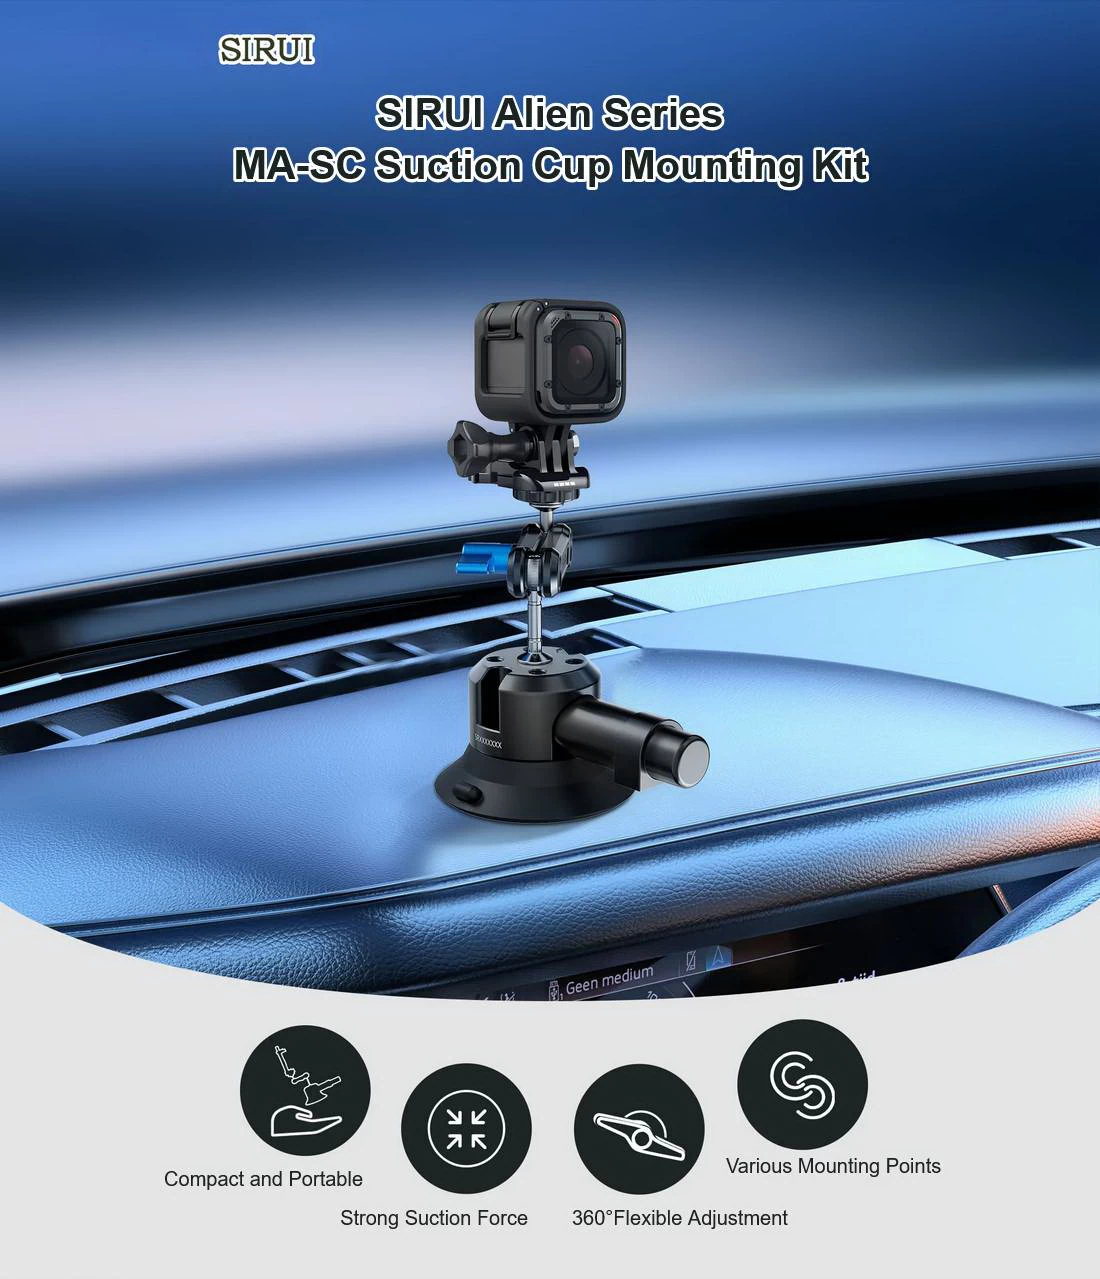 Sirui Alien Series Suction Cup Mounting Kit-Des1